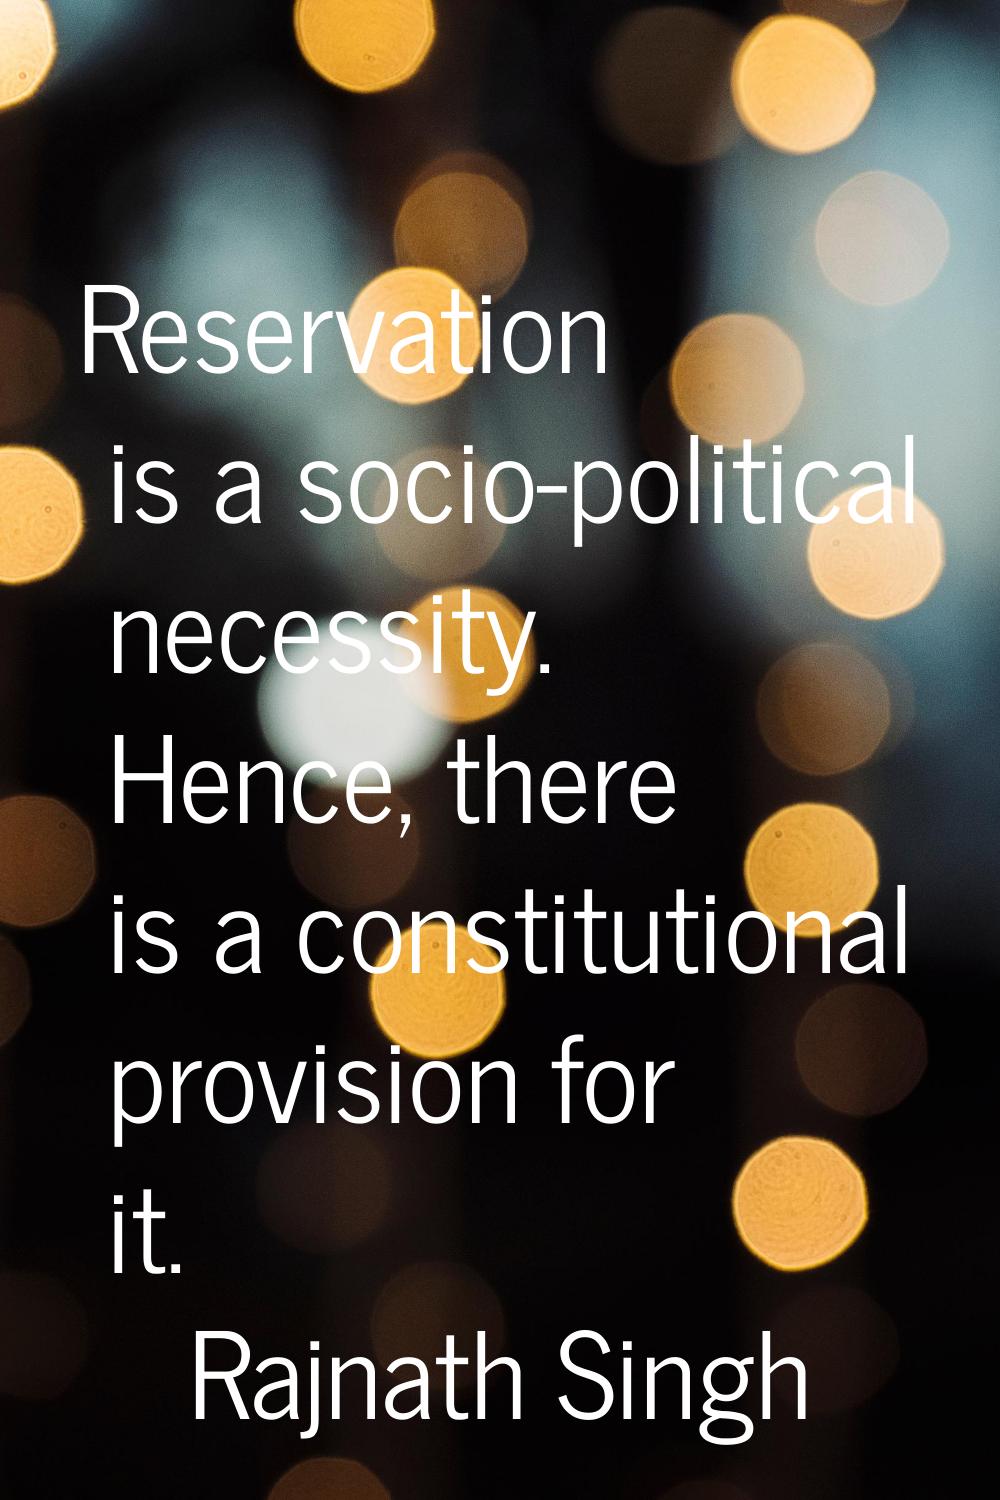 Reservation is a socio-political necessity. Hence, there is a constitutional provision for it.